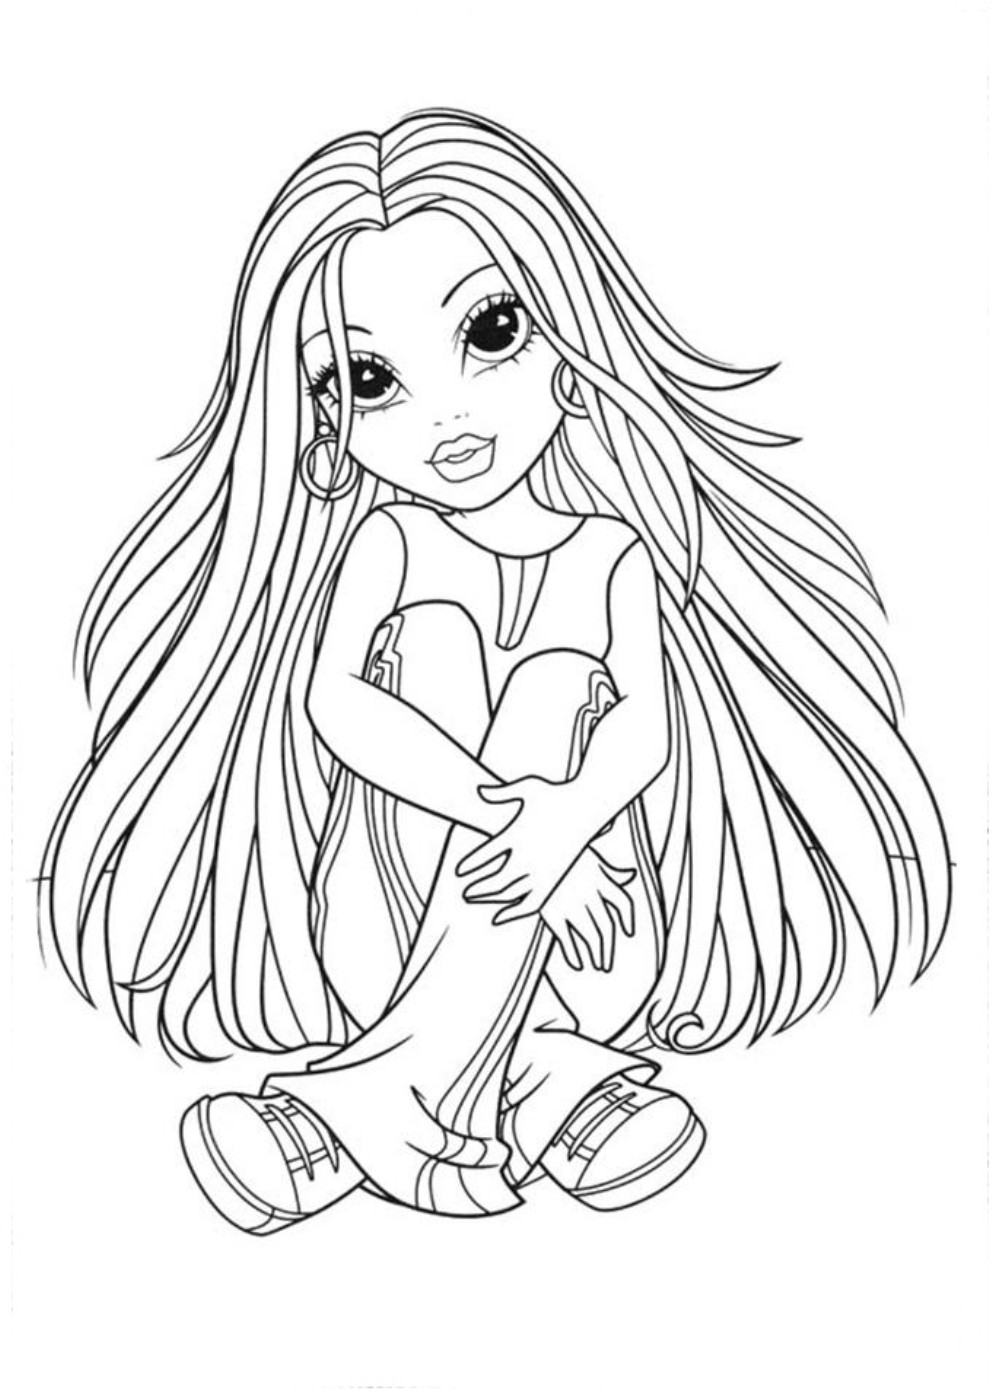 Coloring Pages To Print For Girls
 American Girl Doll Drawing at GetDrawings